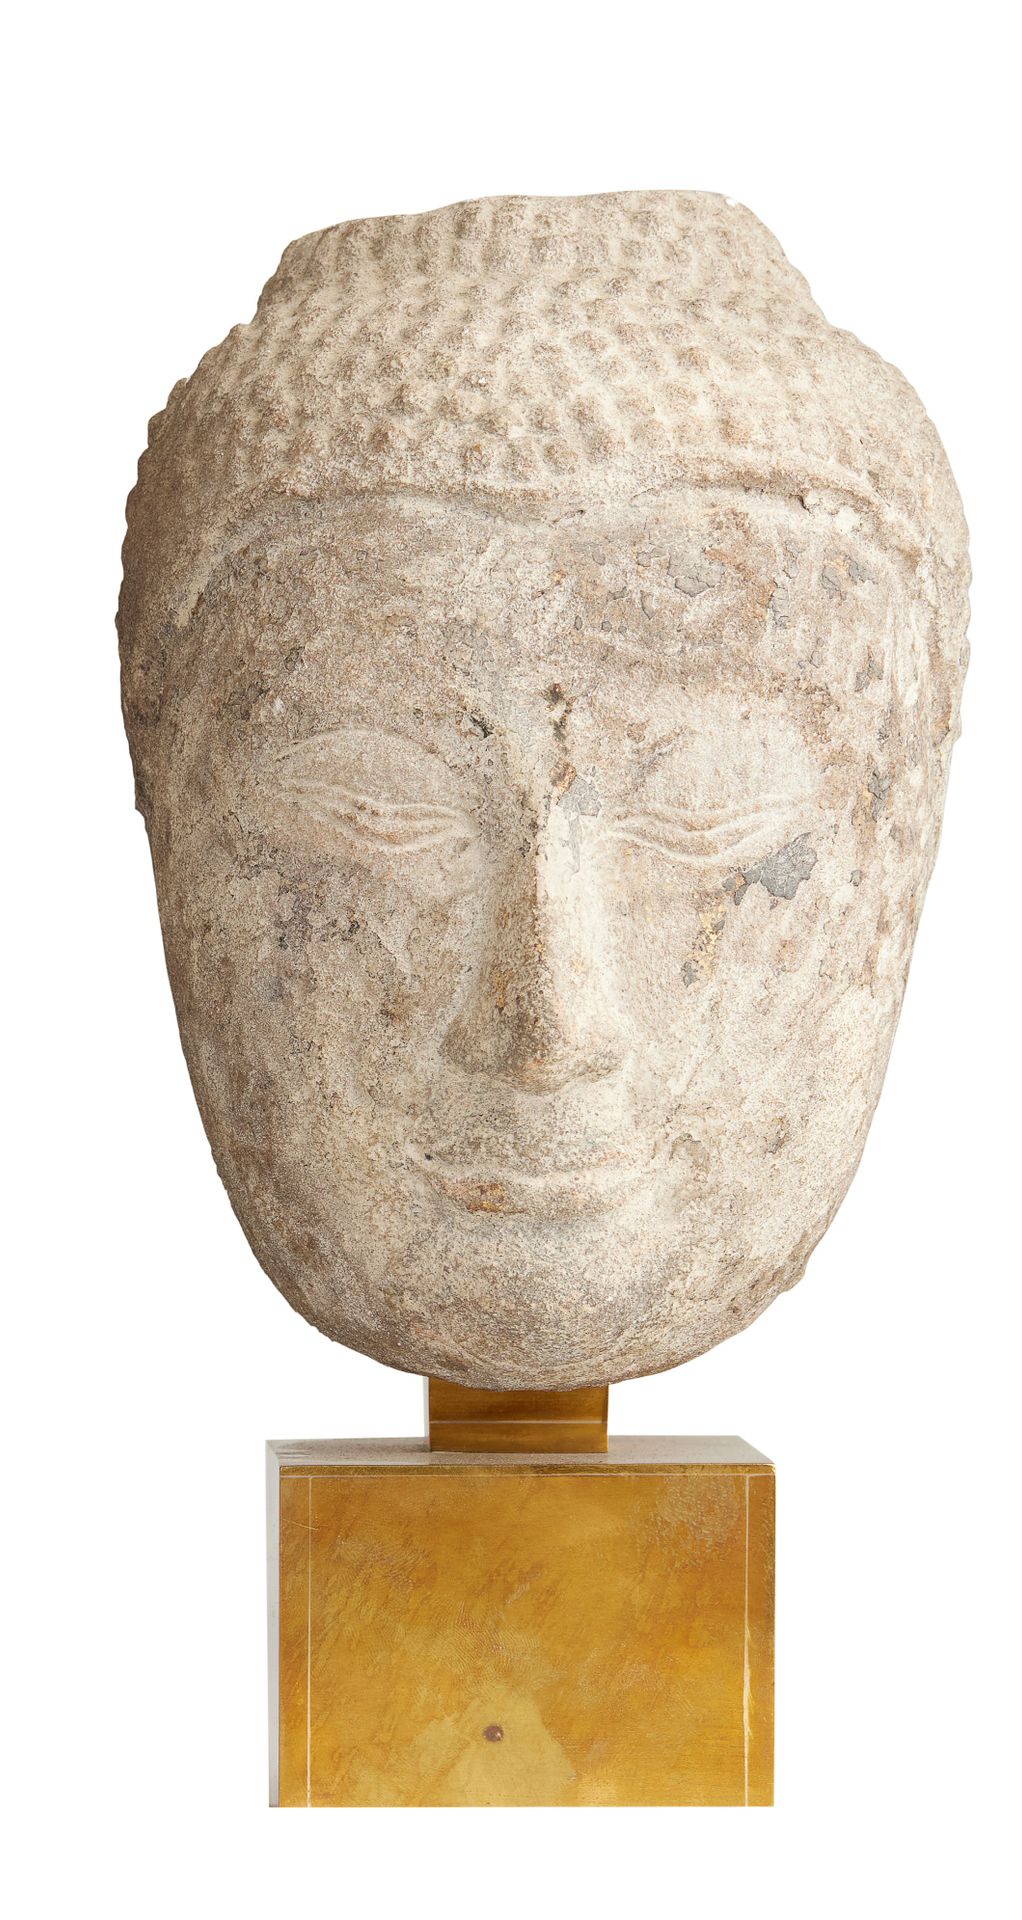 Null HEAD OF BUDDHA
In beige sandstone, formerly lacquered.
The face with half-c&hellip;